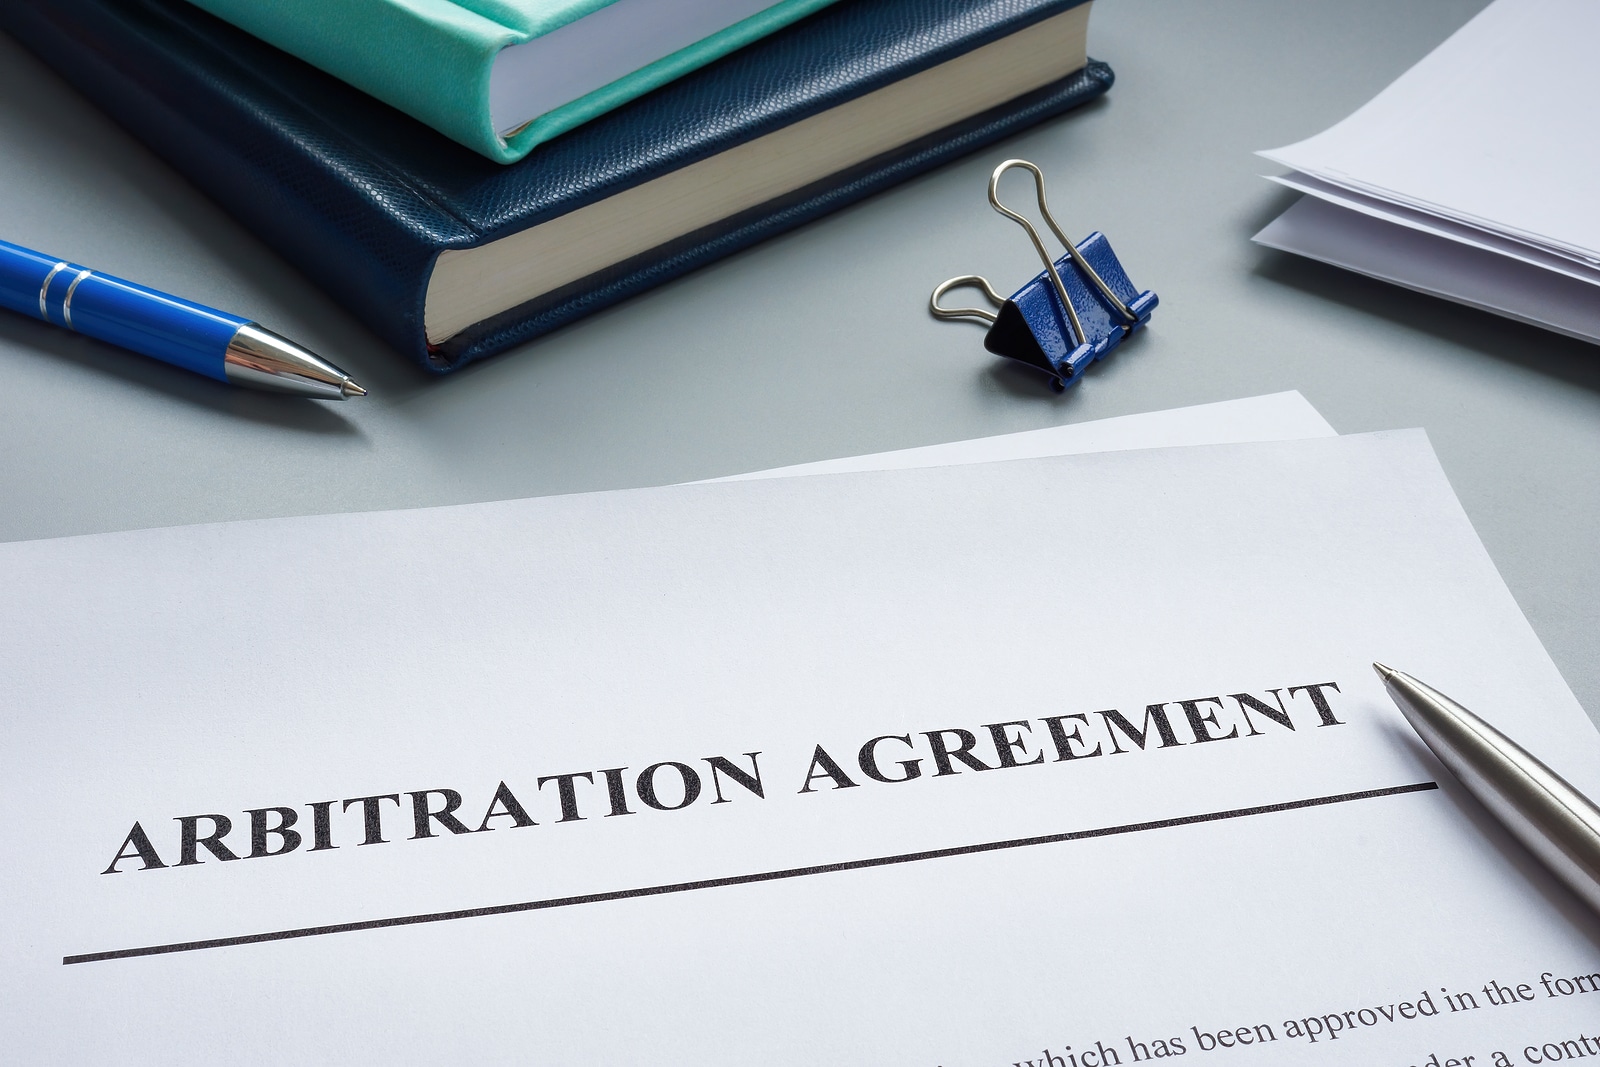 arbitration clauses